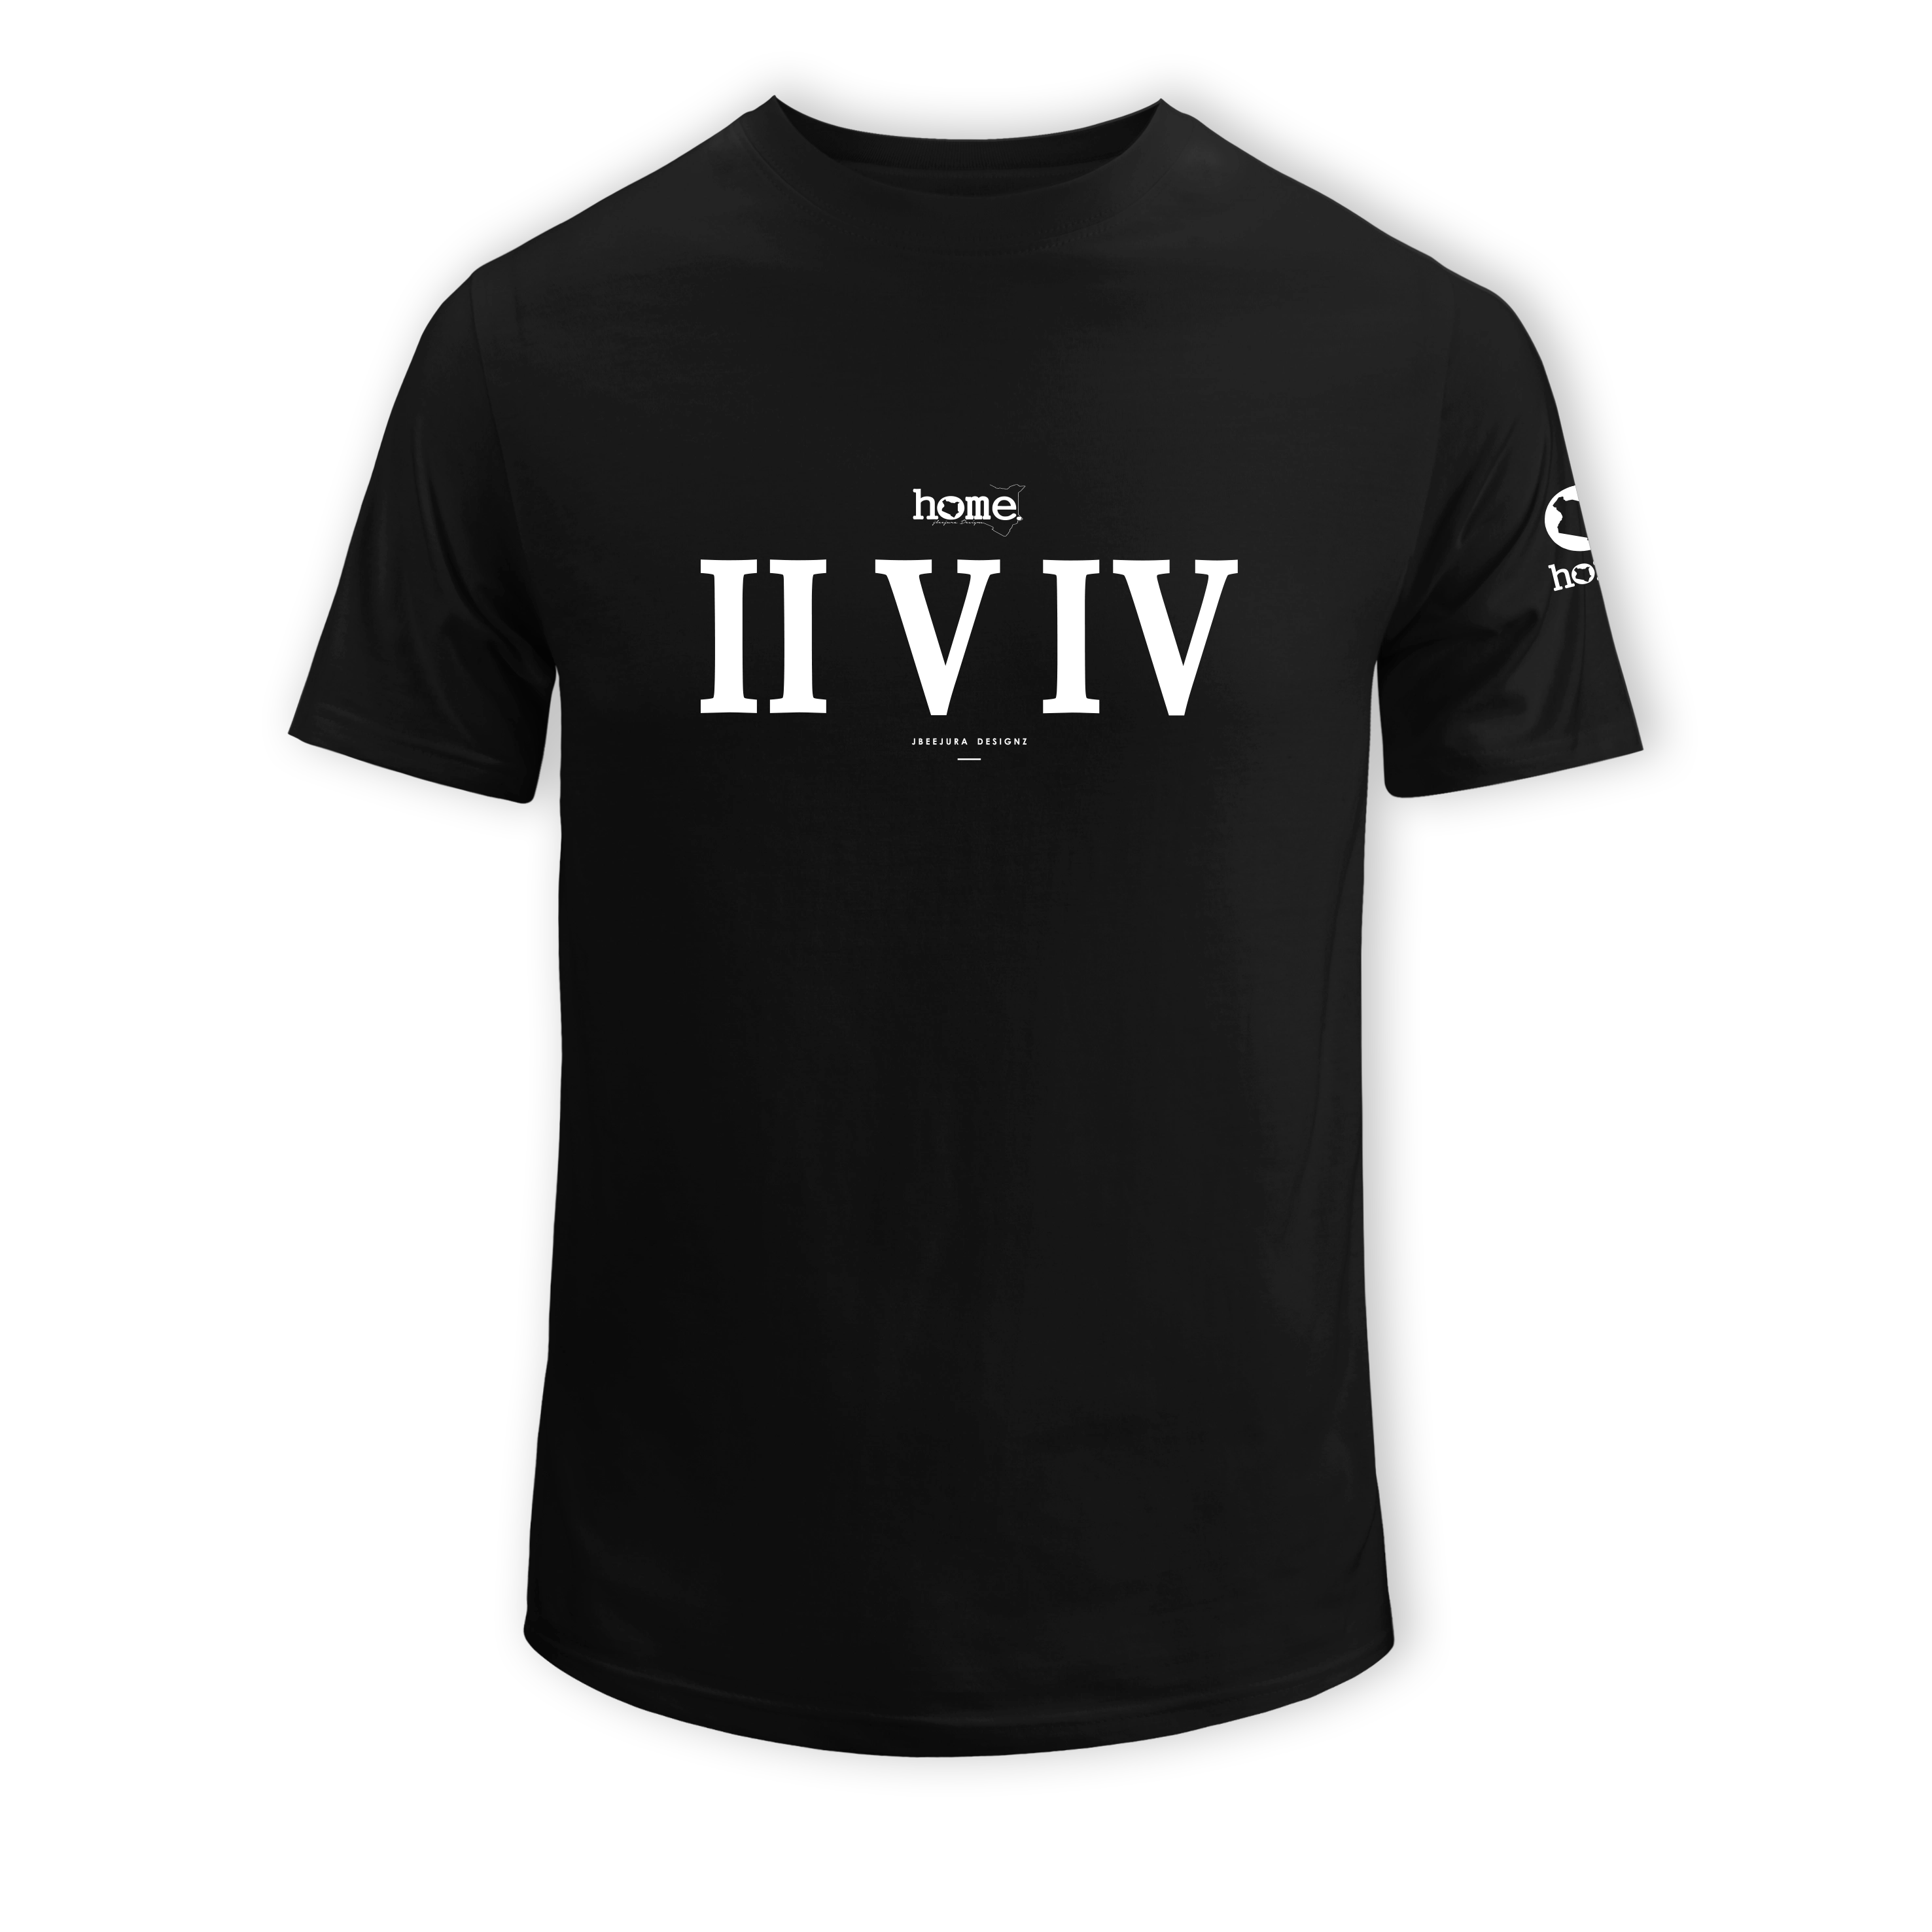 home_254 SHORT-SLEEVED BLACK T-SHIRT WITH A WHITE  ROMAN NUMERALS PRINT – COTTON PLUS FABRIC